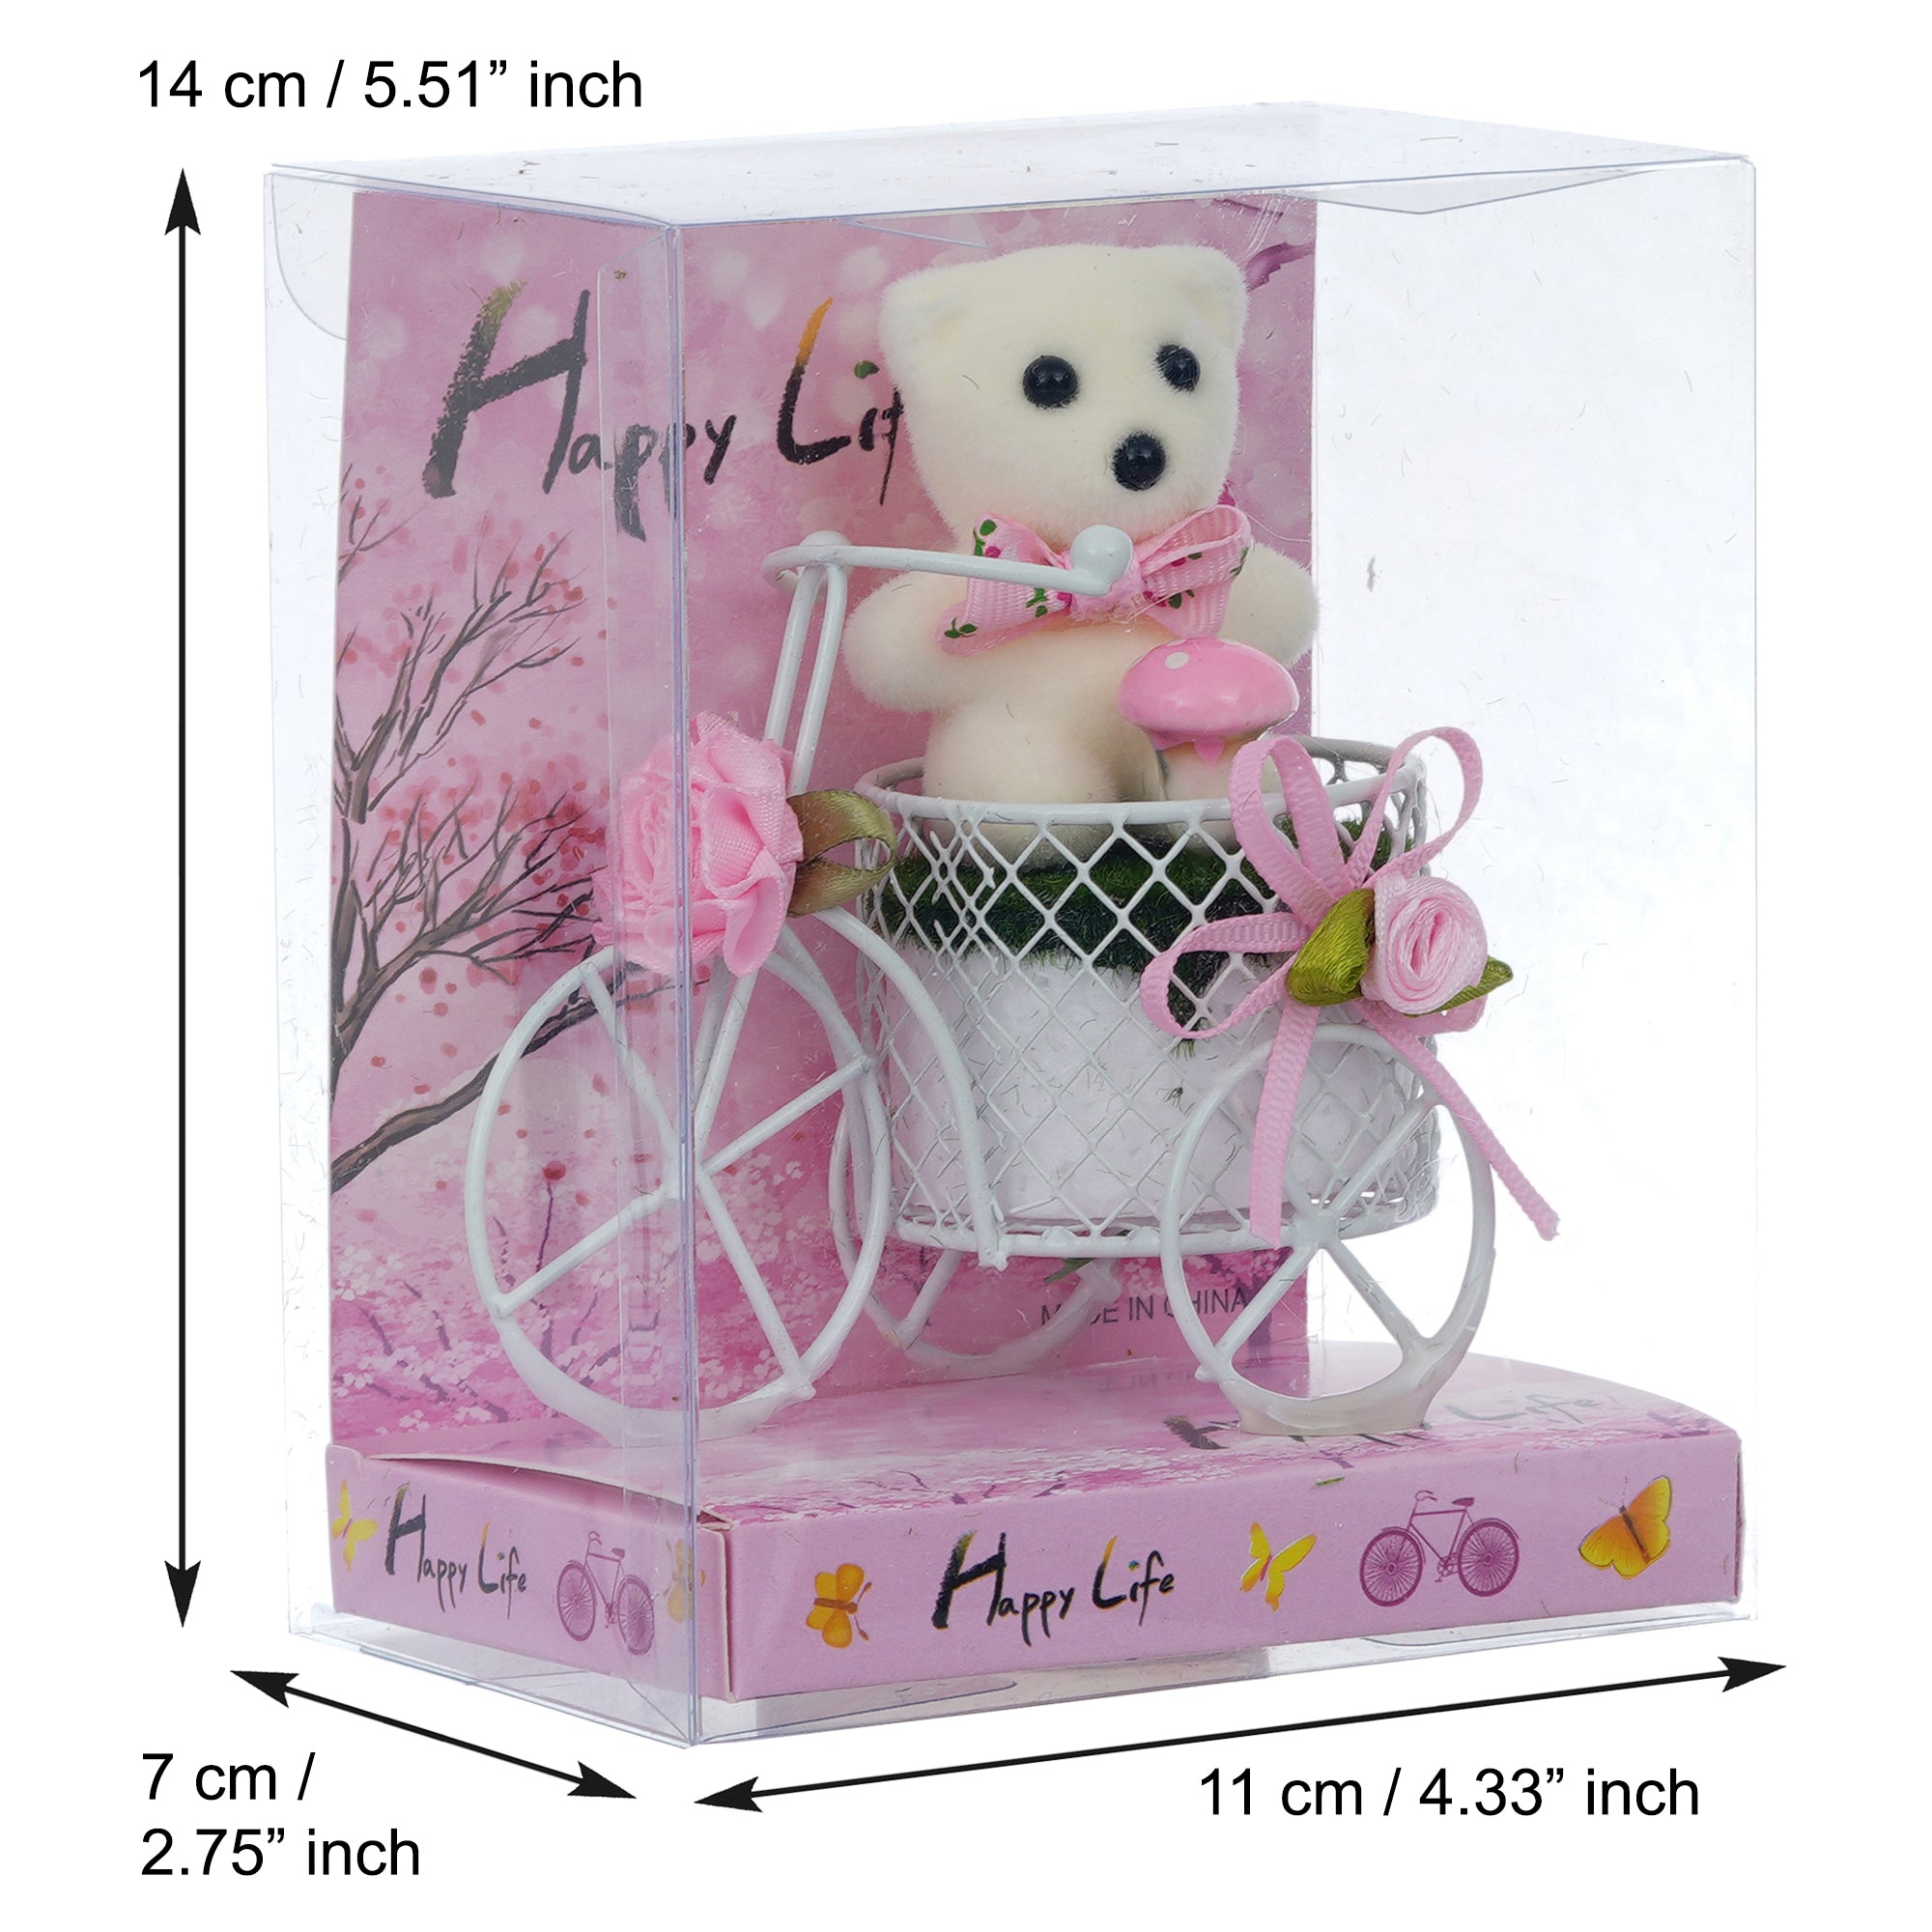 White Cycle with Teddy Bear and Rose Petals Gift Box 4